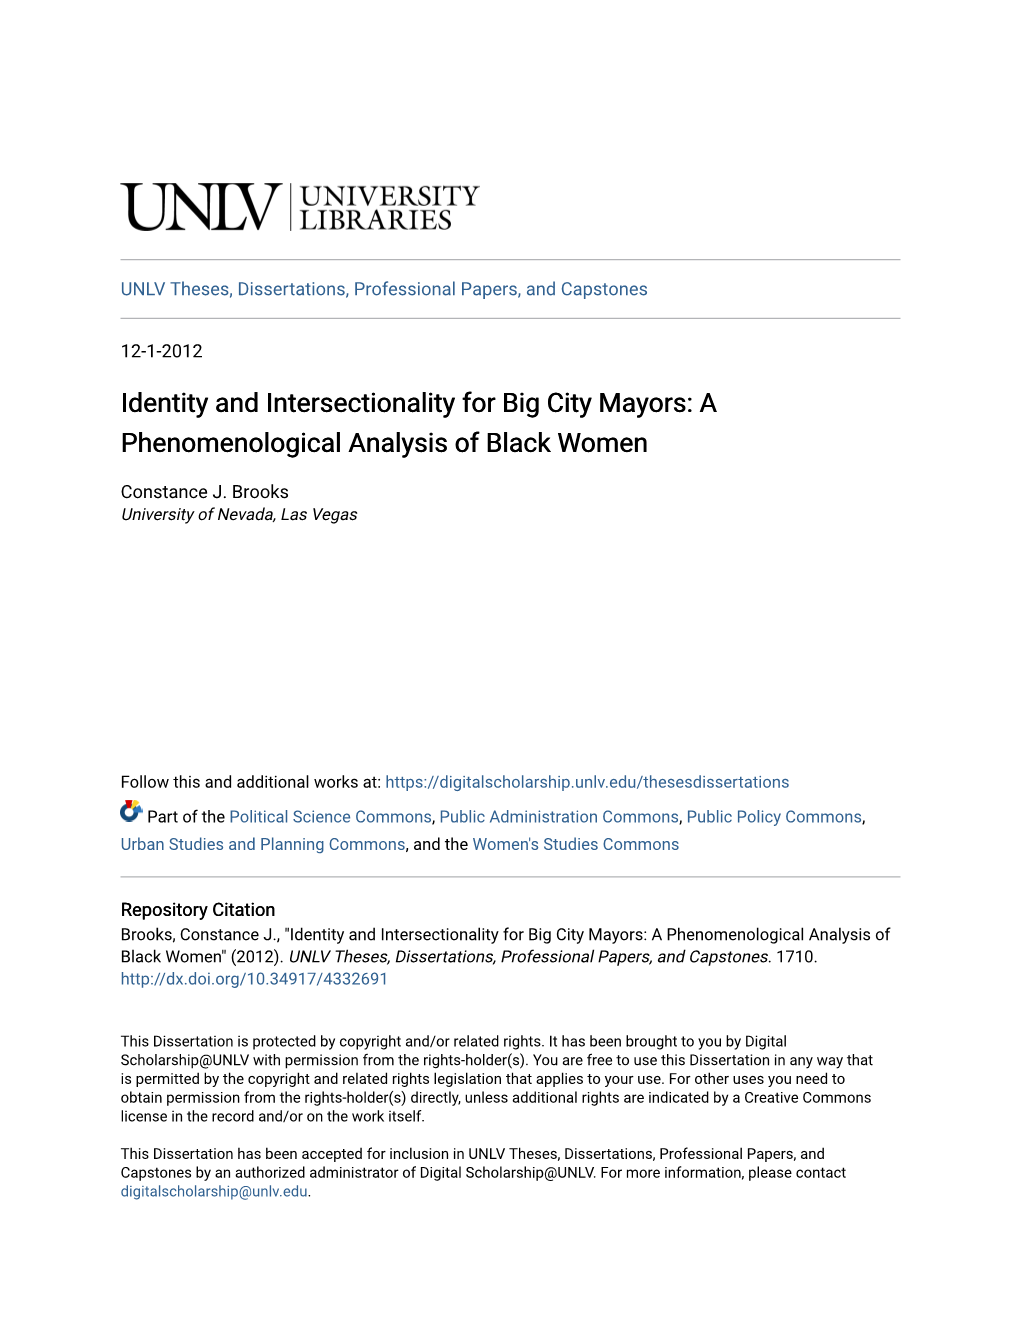 Identity and Intersectionality for Big City Mayors: a Phenomenological Analysis of Black Women